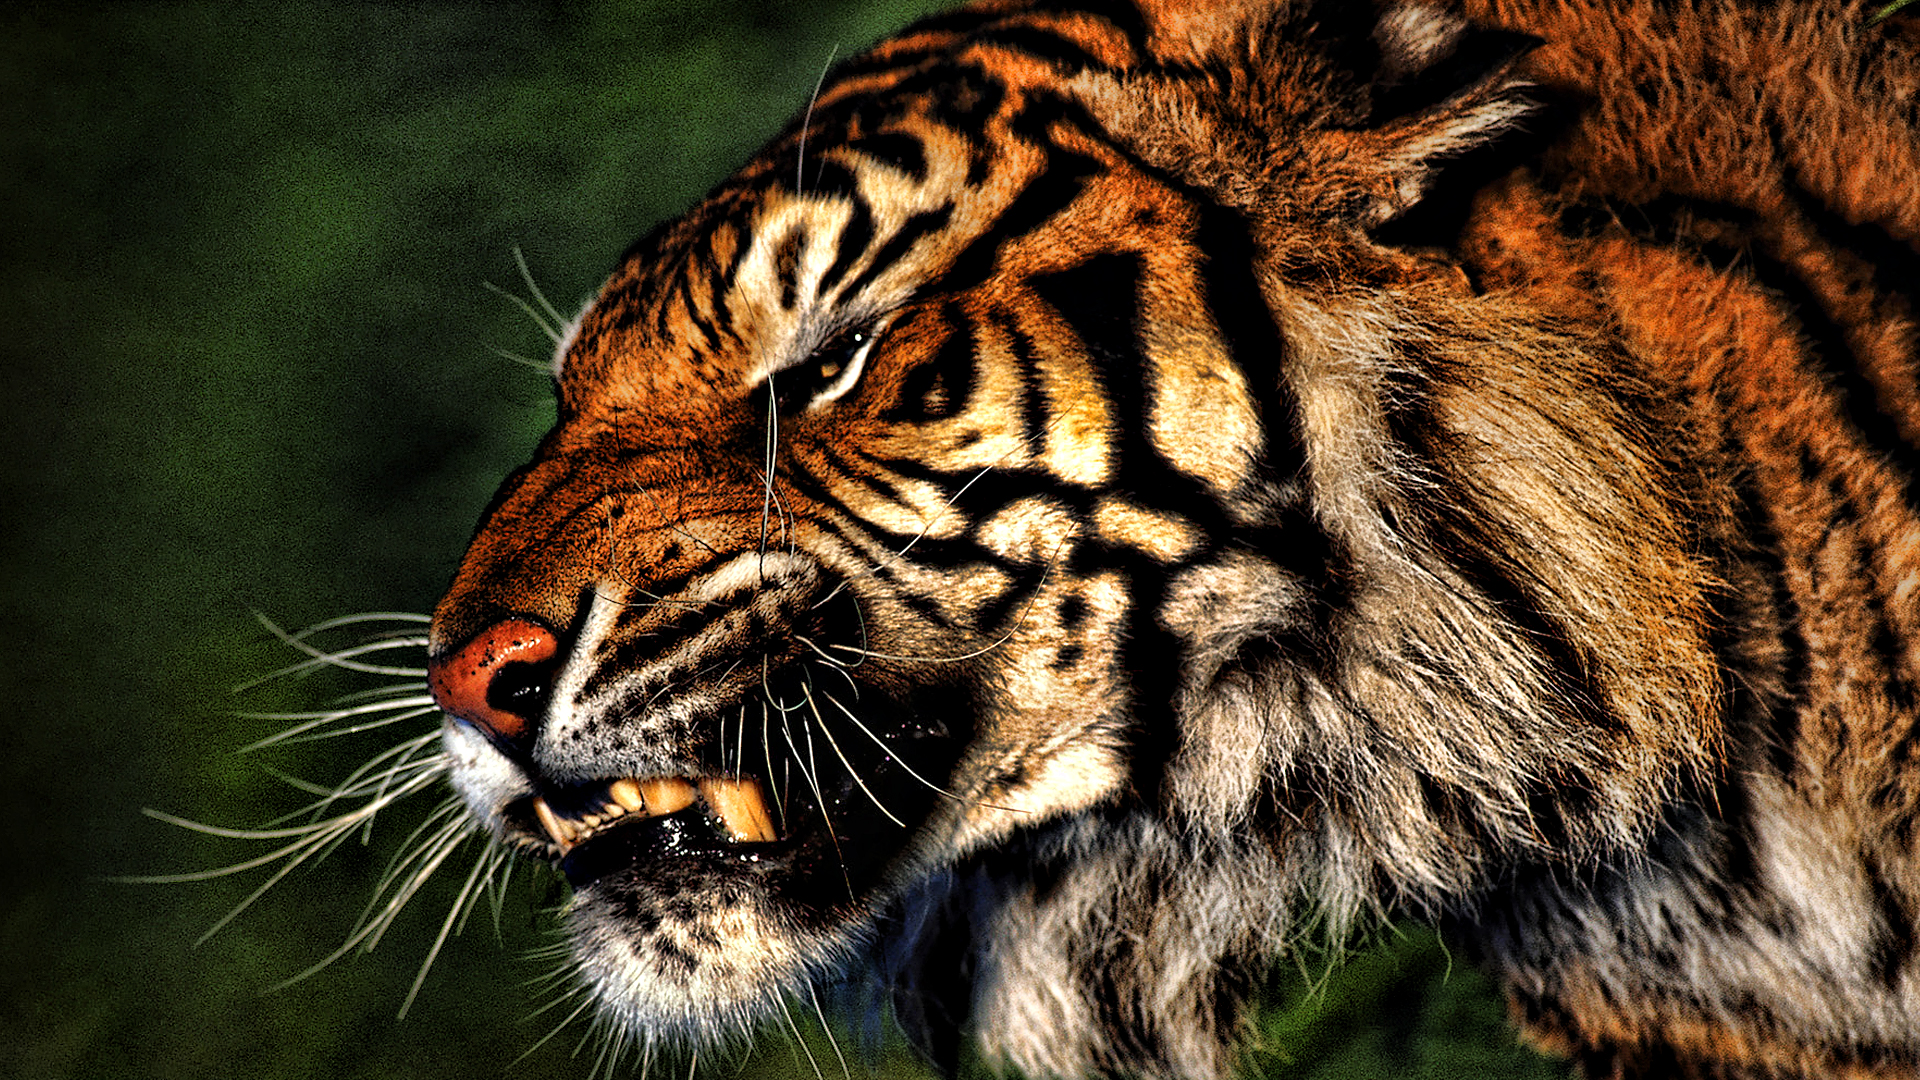 HD Angry Tiger Face Wallpaper 1920×1080 Full Size - HiReWallpapers ...